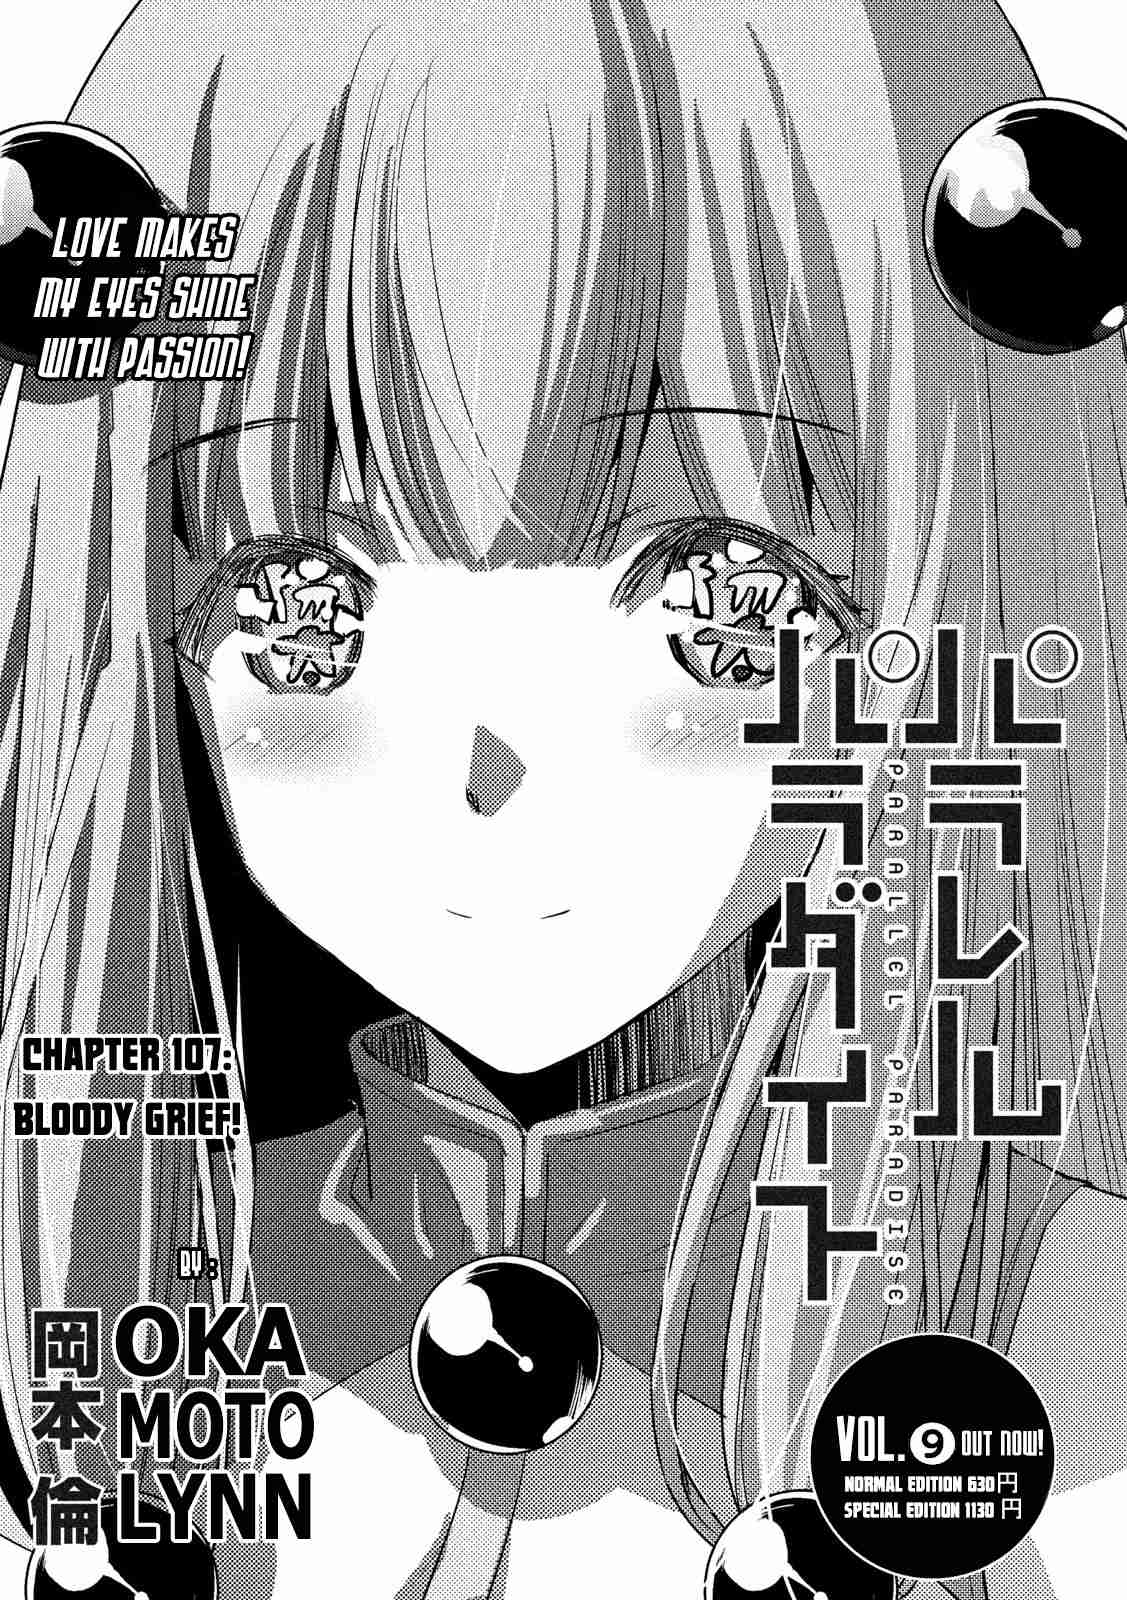 Parallel Paradise Vol. 11 Ch. 107 Bloody Grief